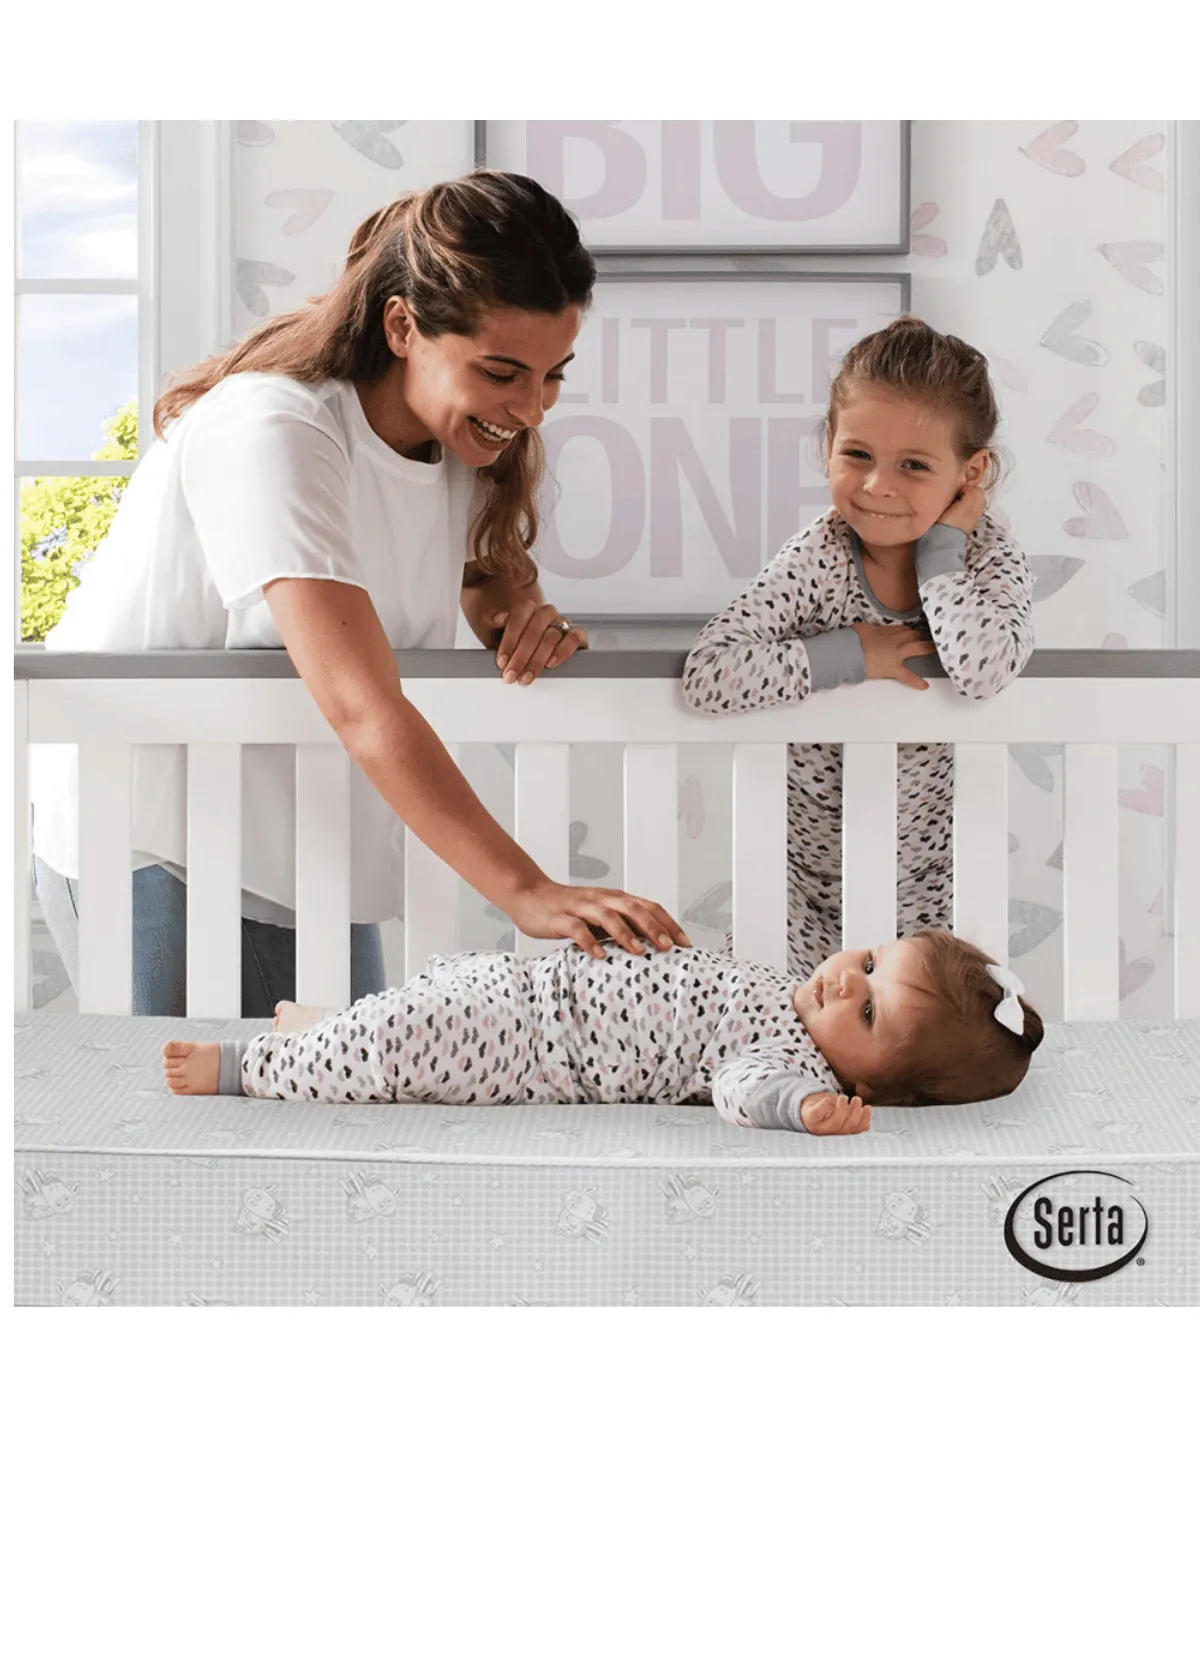 "Serta Crib Mattress | Top Rated Infants and Toddlers Beds"